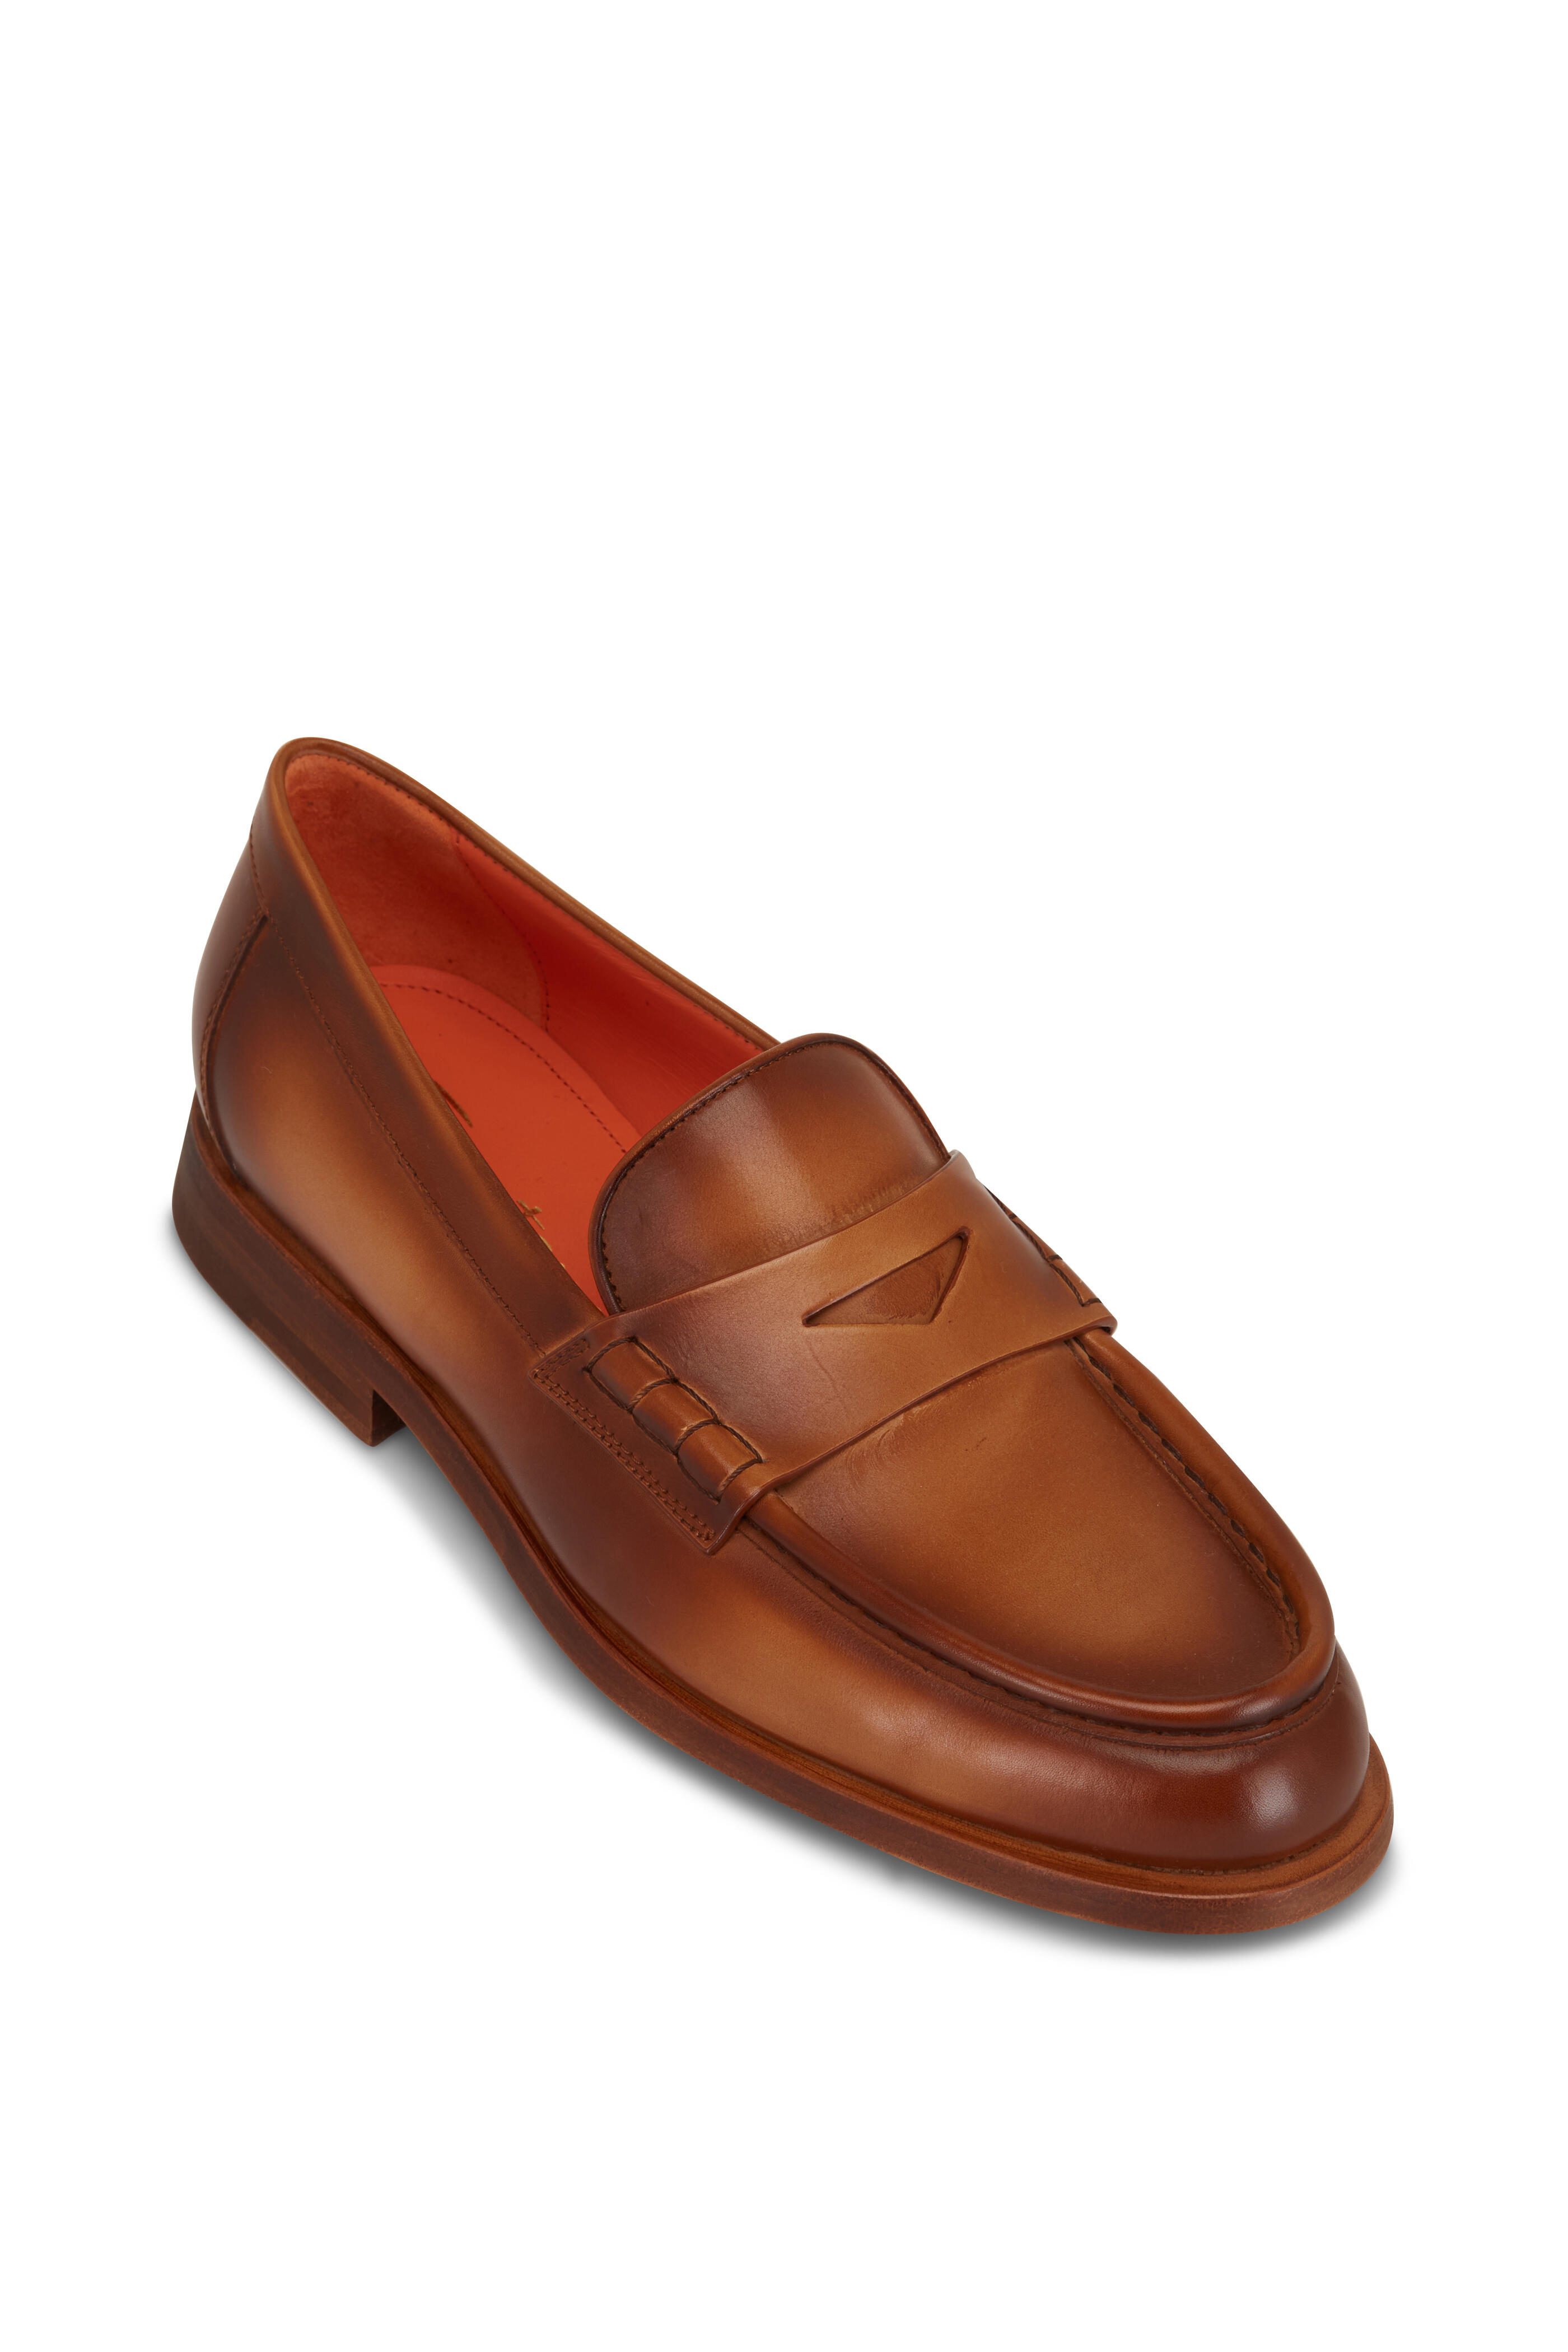 Koppeling Probleem Asser Santoni - Airglow Brown Leather Penny Loafer | Mitchell Stores